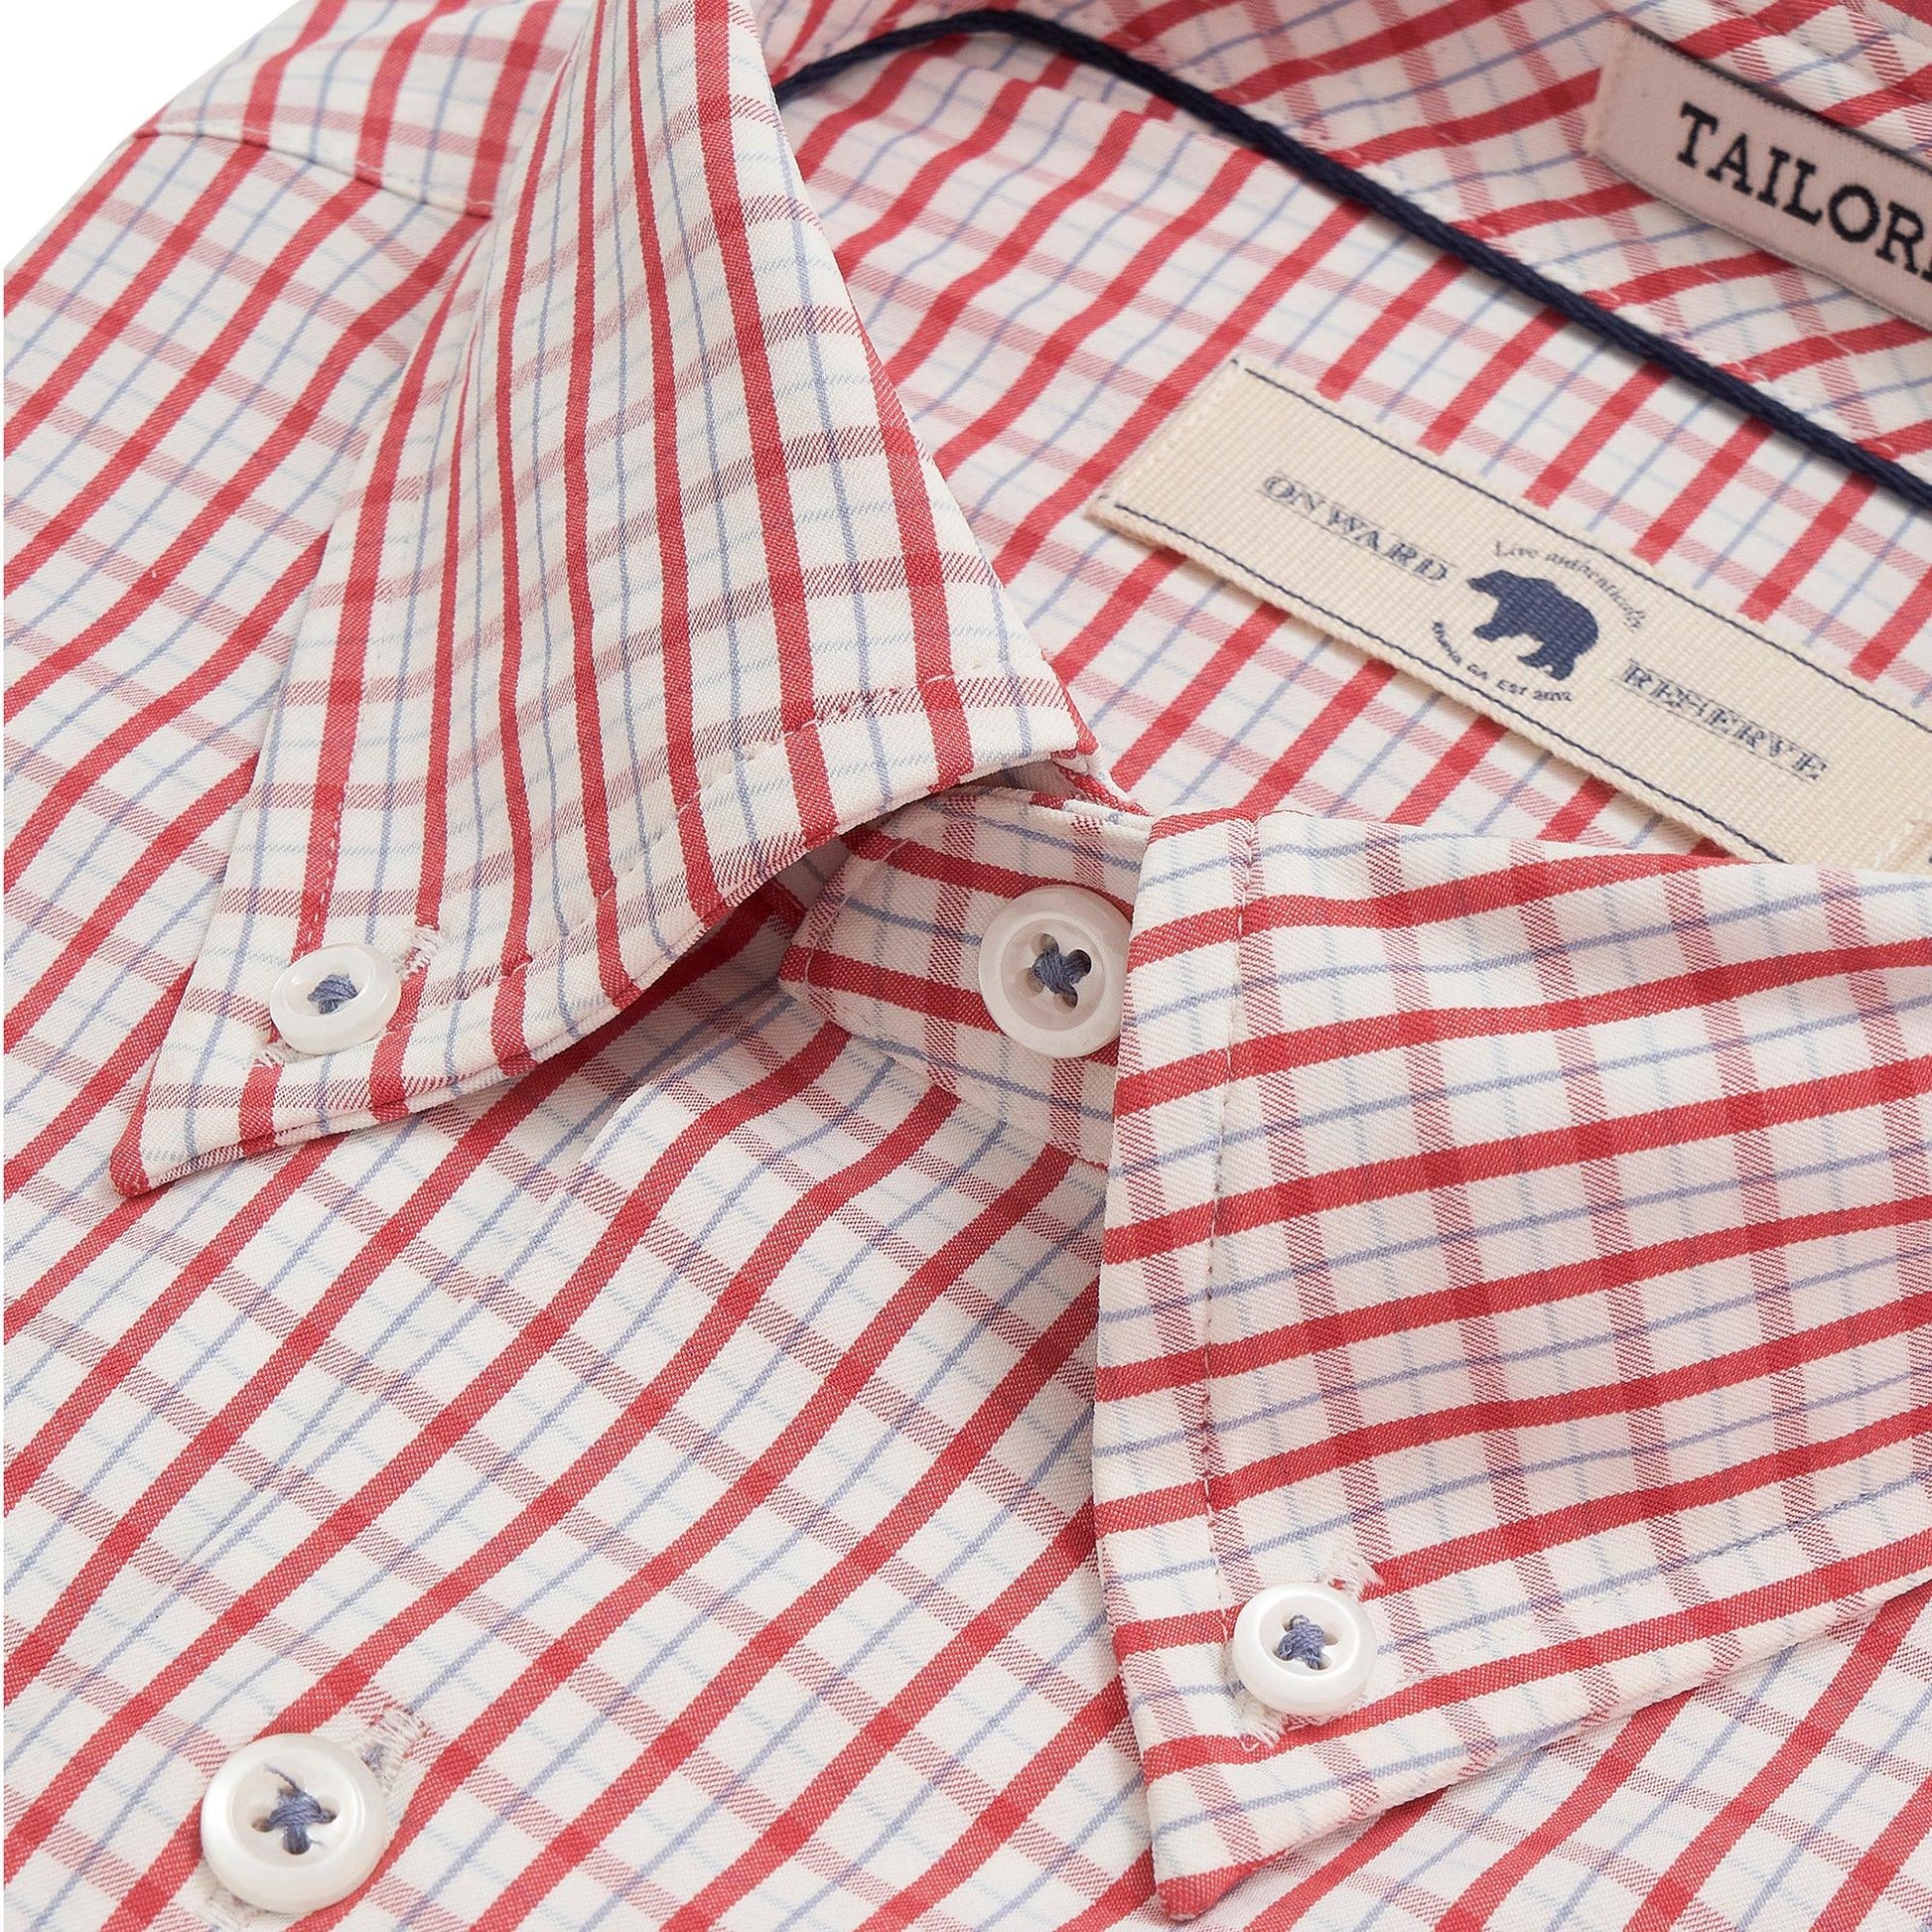 Hathcock Tailored Fit Performance Button Down - Onward Reserve